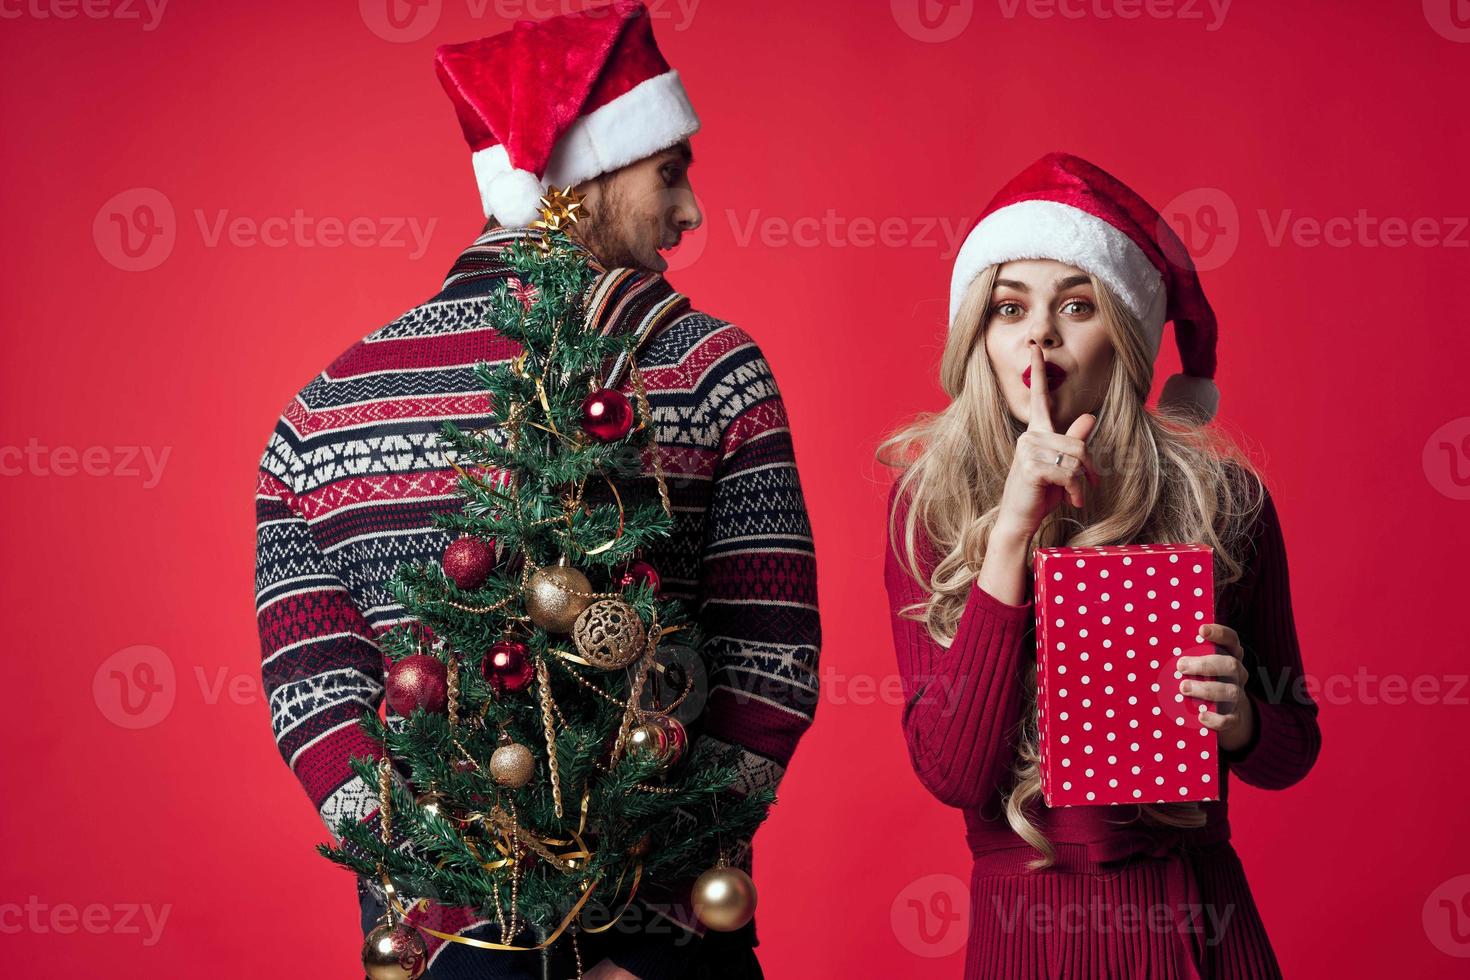 man and woman Christmas tree toys gifts holiday red background photo